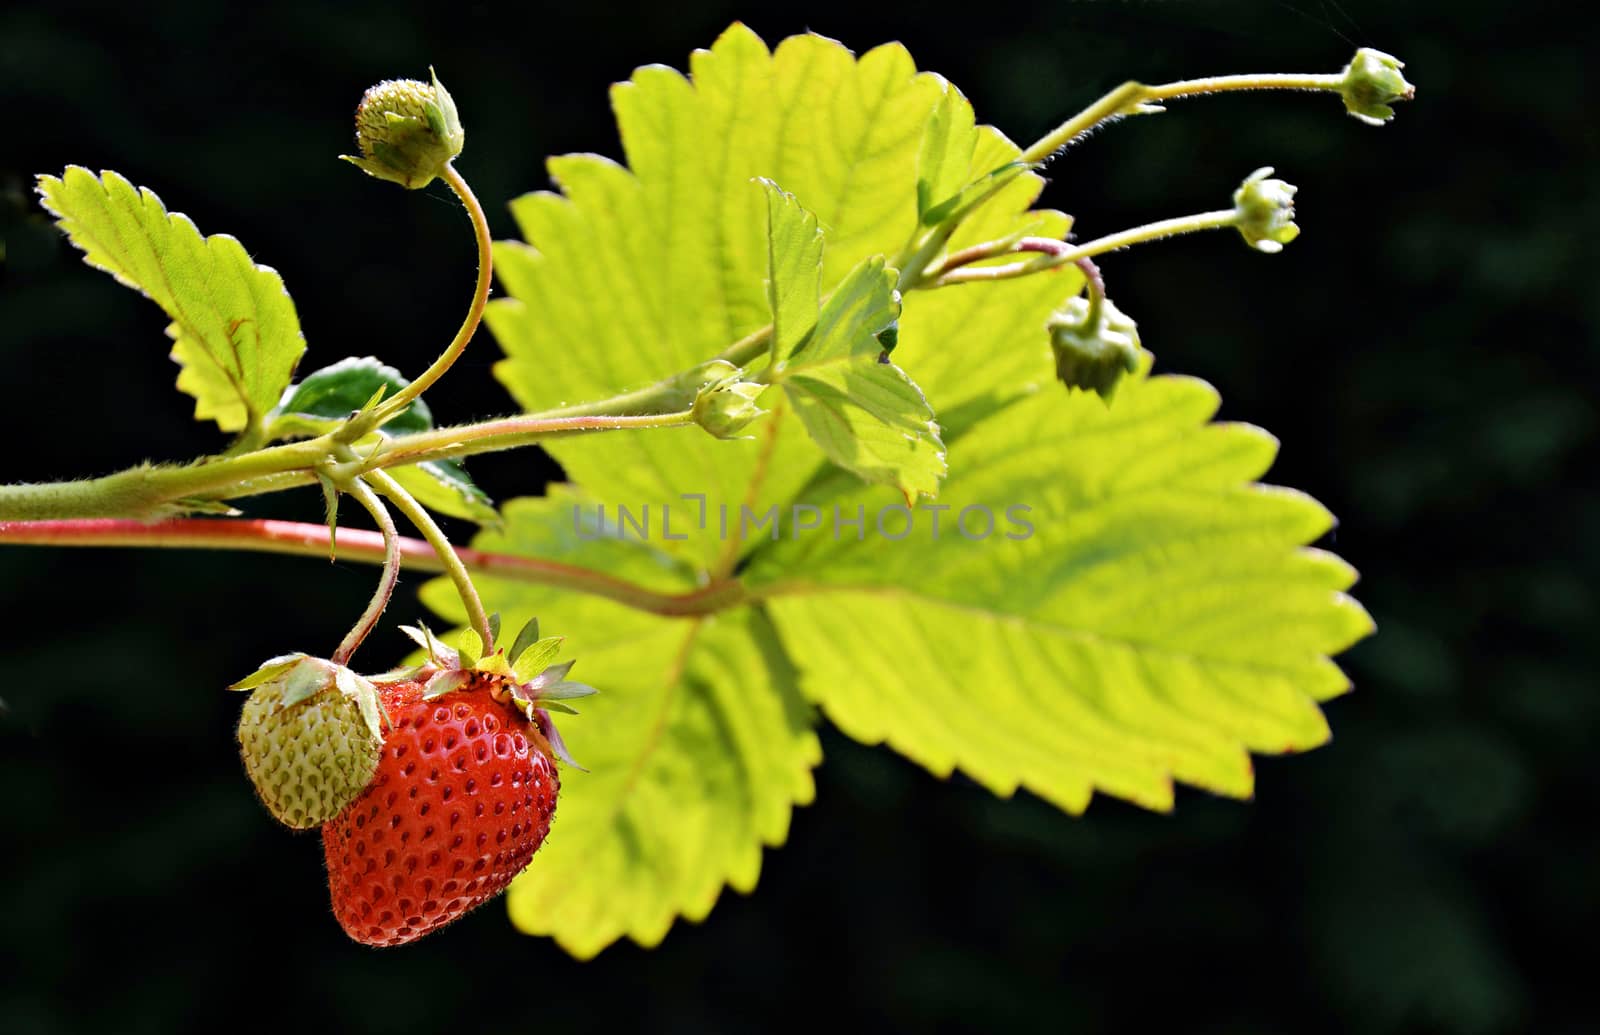 A two strawberries grow on a branch. One is ripe and ready to be picked, the other one will be ripe soon. Photo was taken on a dark background.